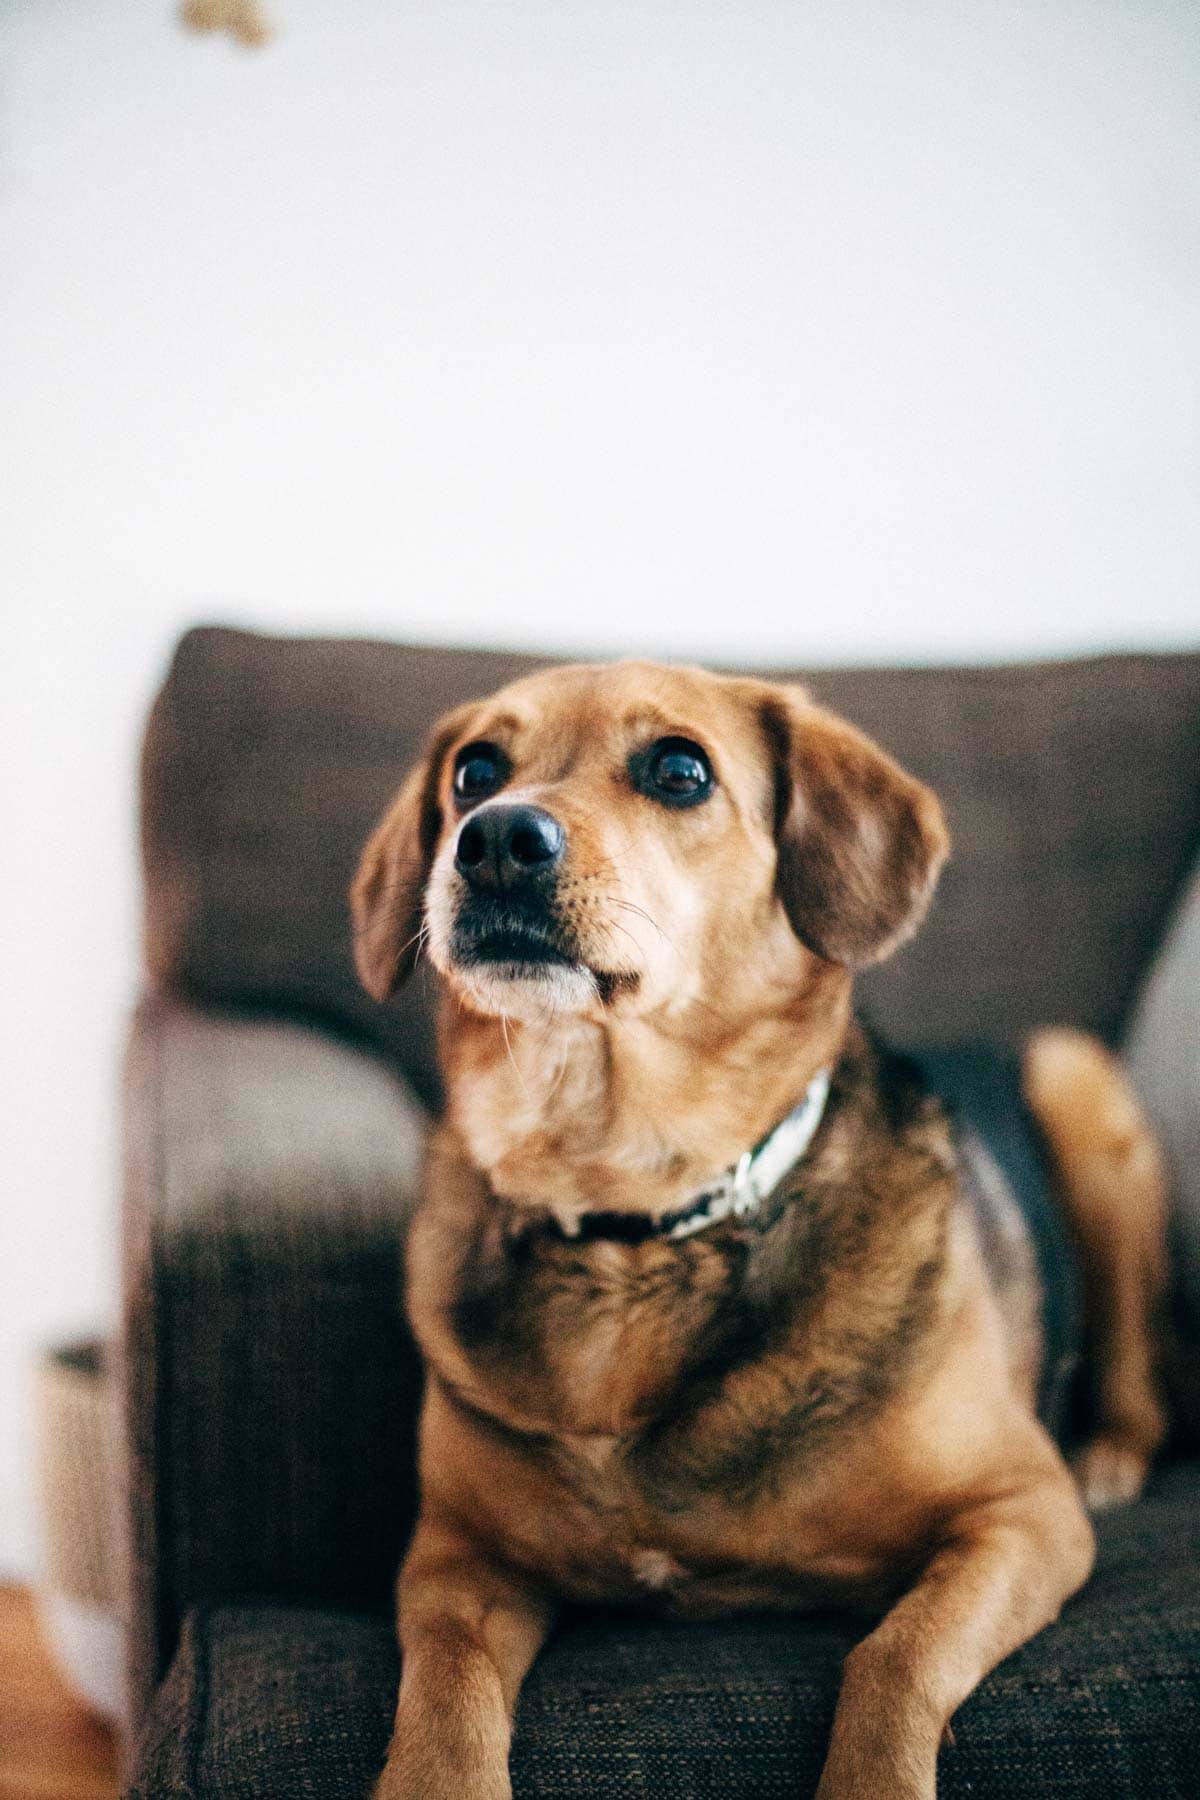 A dog sitting on a couch and looking upwards.